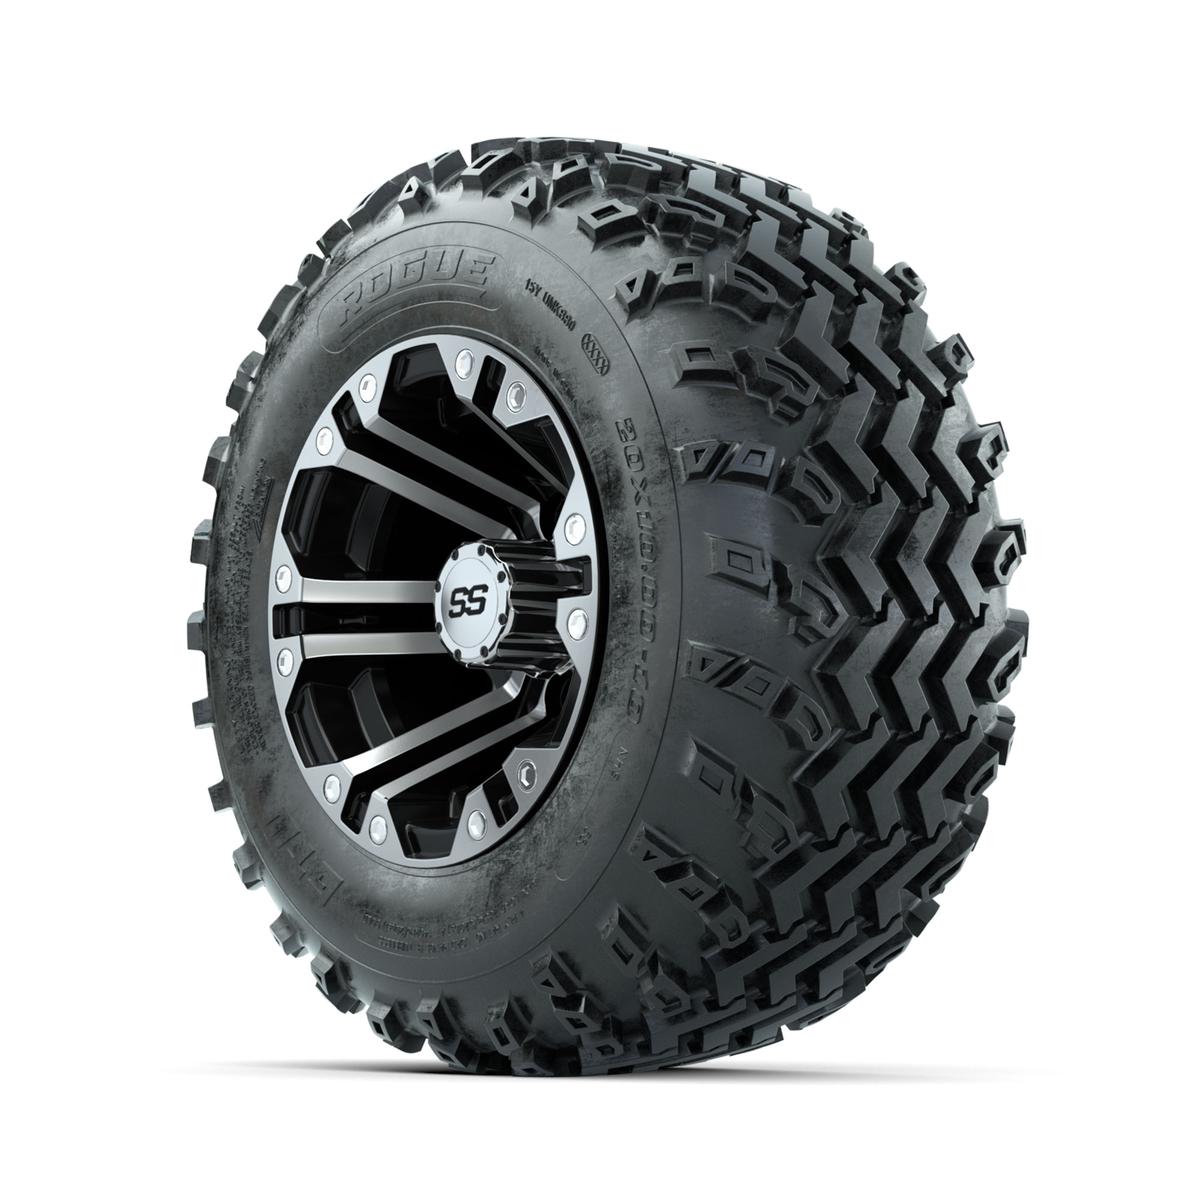 GTW Specter Machined/Black 10 in Wheels with 20x10.00-10 Rogue All Terrain Tires – Full Set